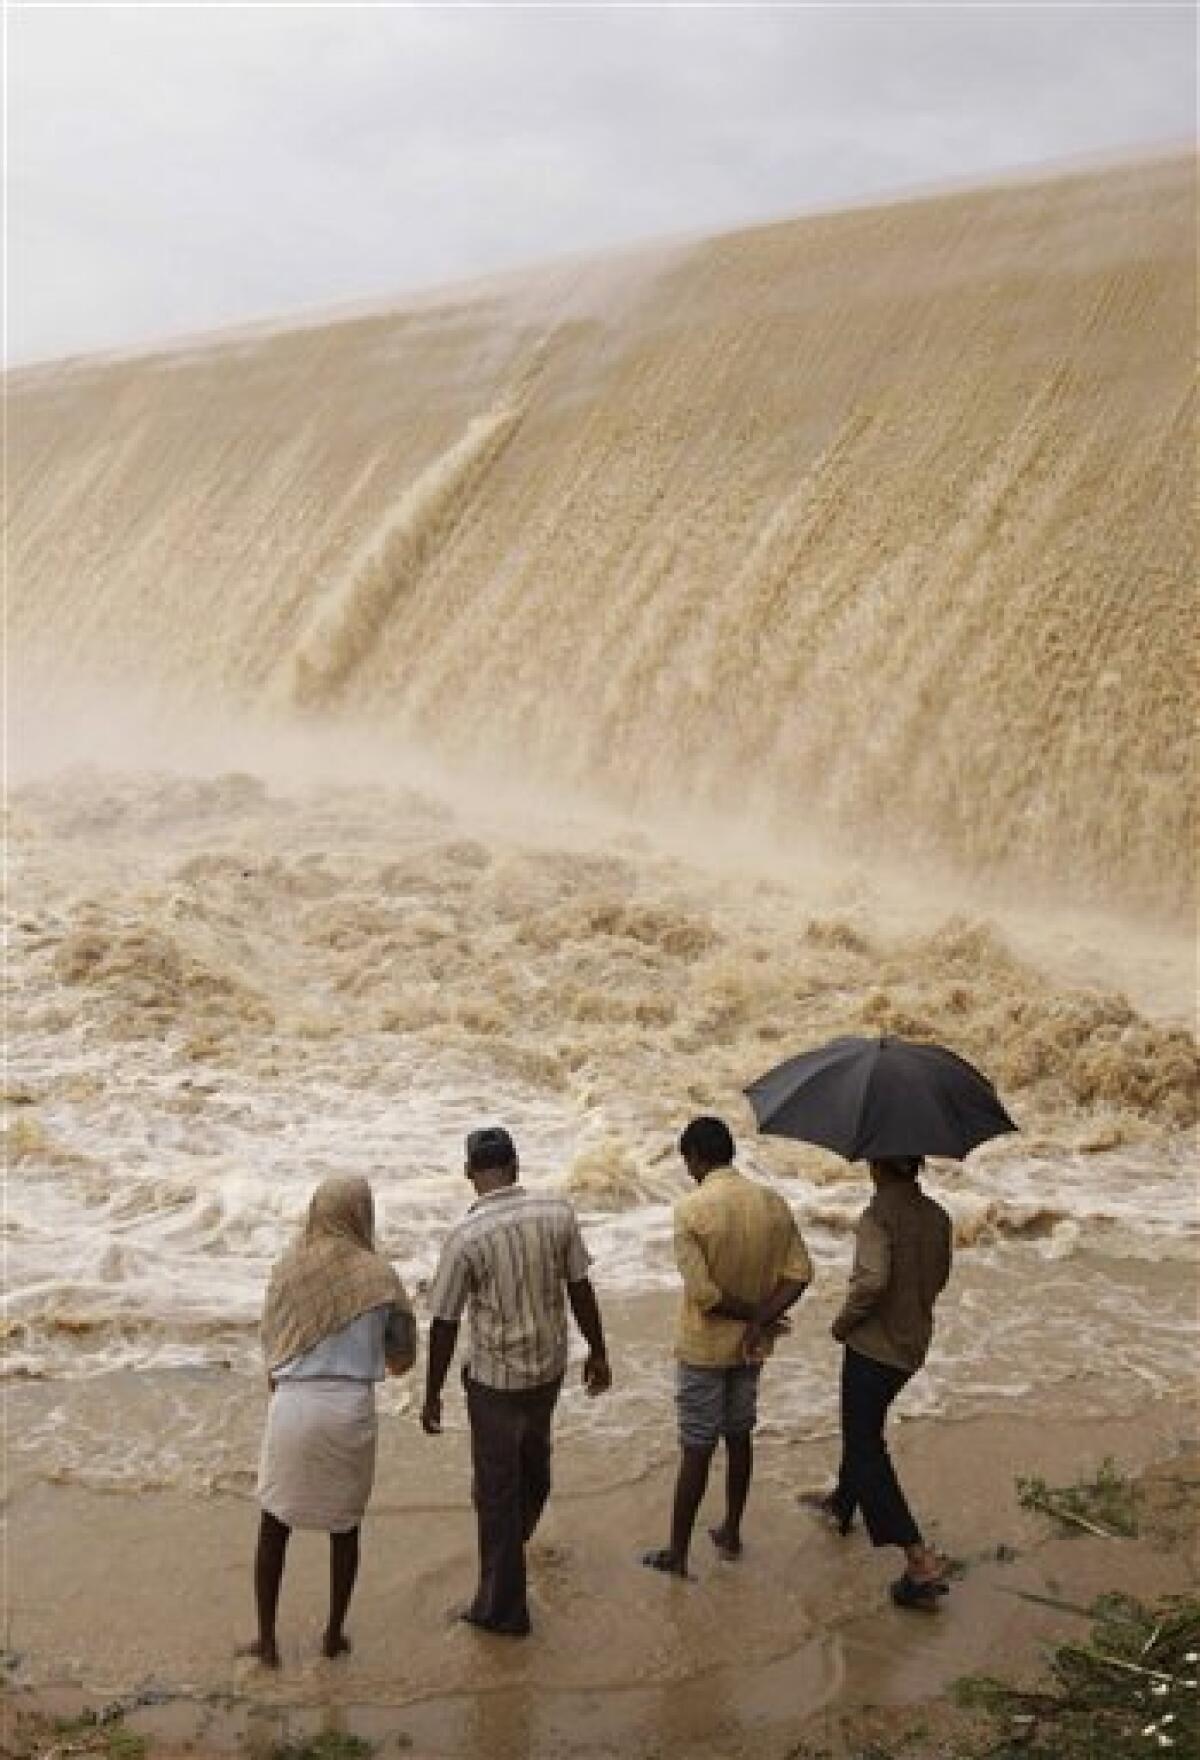 People look at an overflowing dam in Dindi, in Andhra Pradesh state, India, Thursday, Oct. 1, 2009. Torrential rains destroyed hundreds of homes and caused heavy flooding in southern India, killing at least 15 people and forcing thousands to flee to higher ground, an official said Thursday. The late monsoon flooding in the past two days also damaged roads and inundated rice crops over an area of nearly 120 square miles (300 square kilometers) in Andhra Pradesh state. (AP Photo/Mahesh Kumar A.)